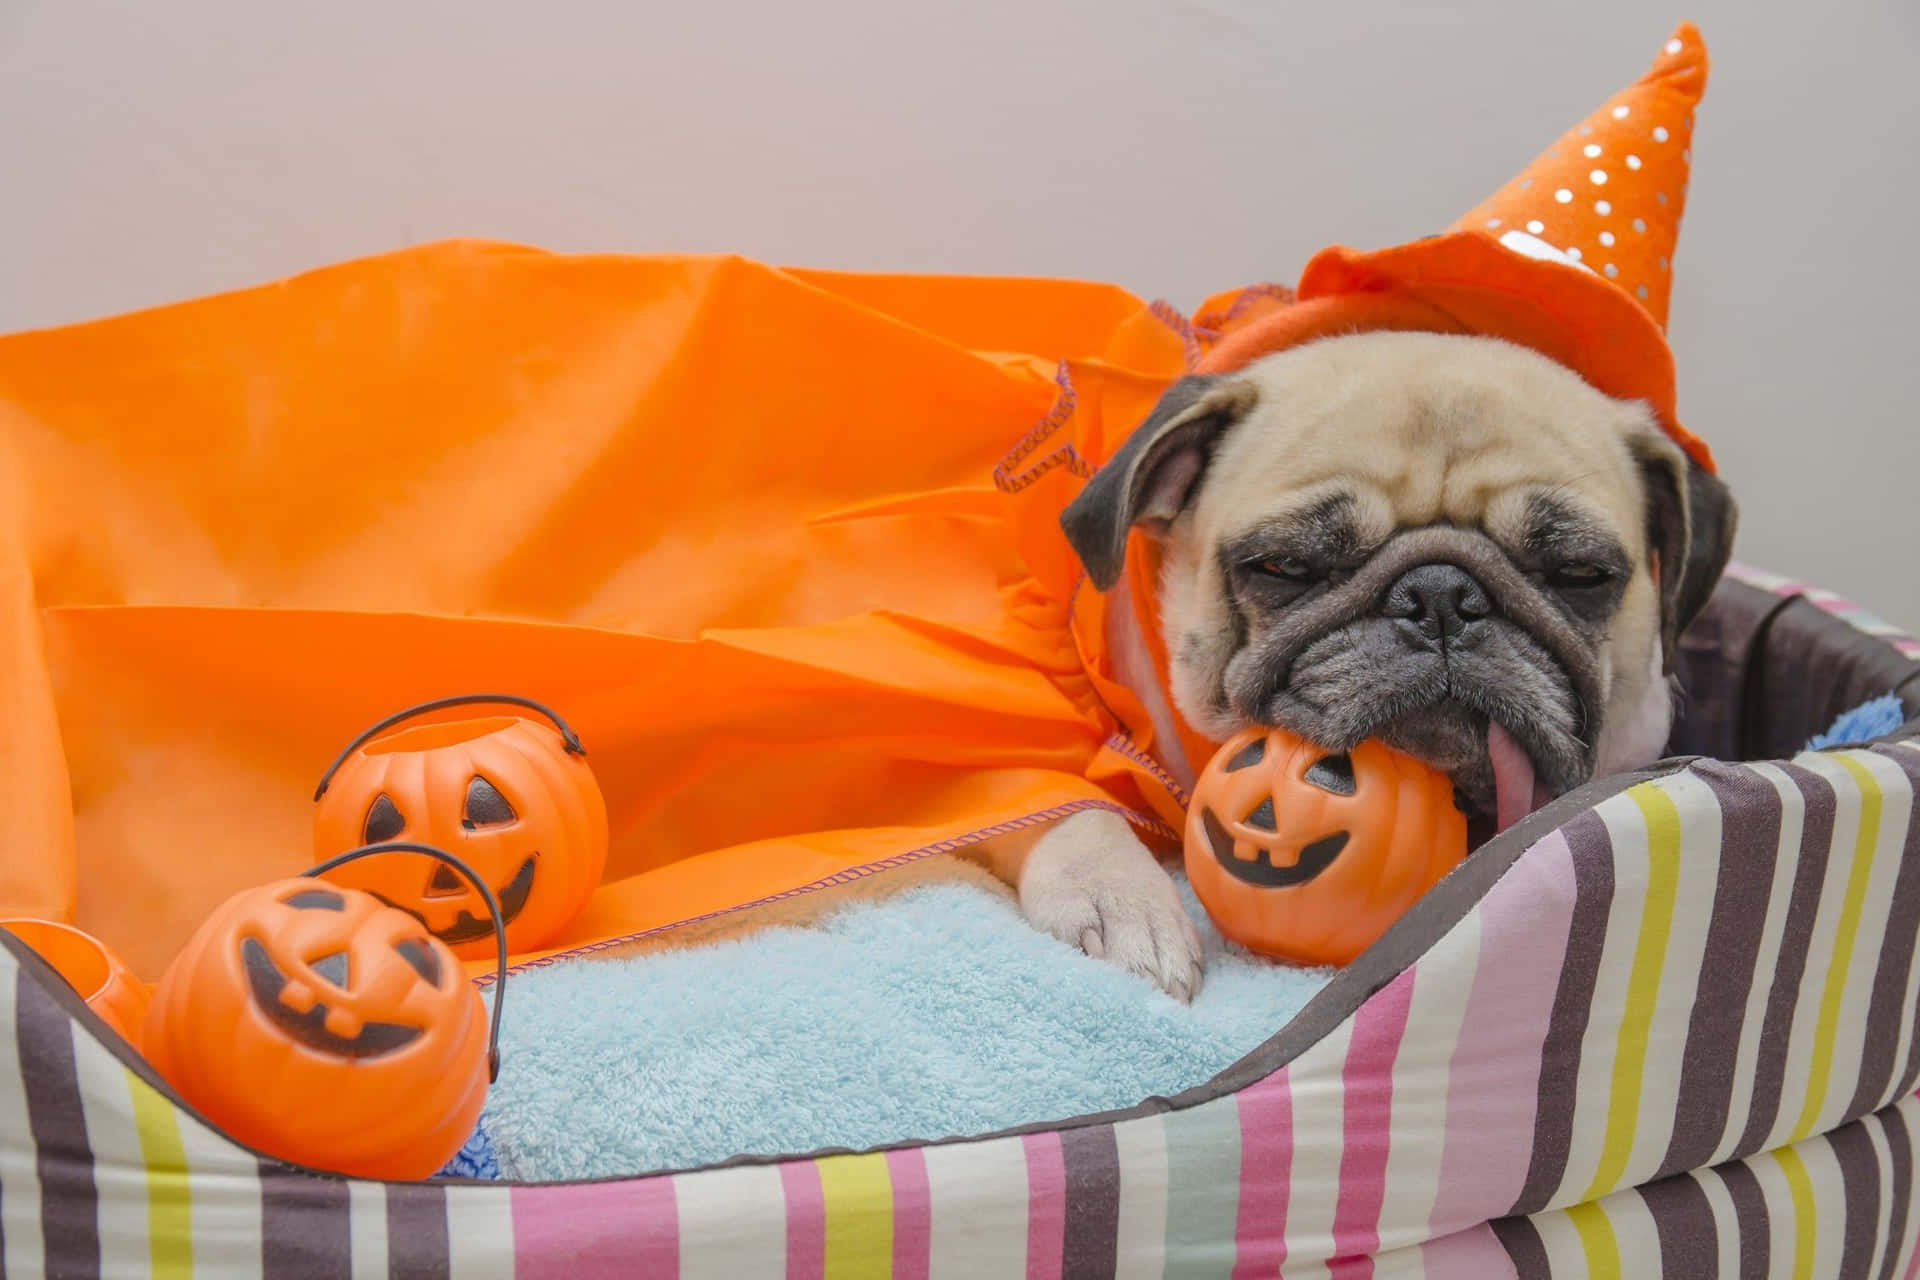 Get Your Pet spooky-ready! Halloween Pet Costumes just in time. Wallpaper